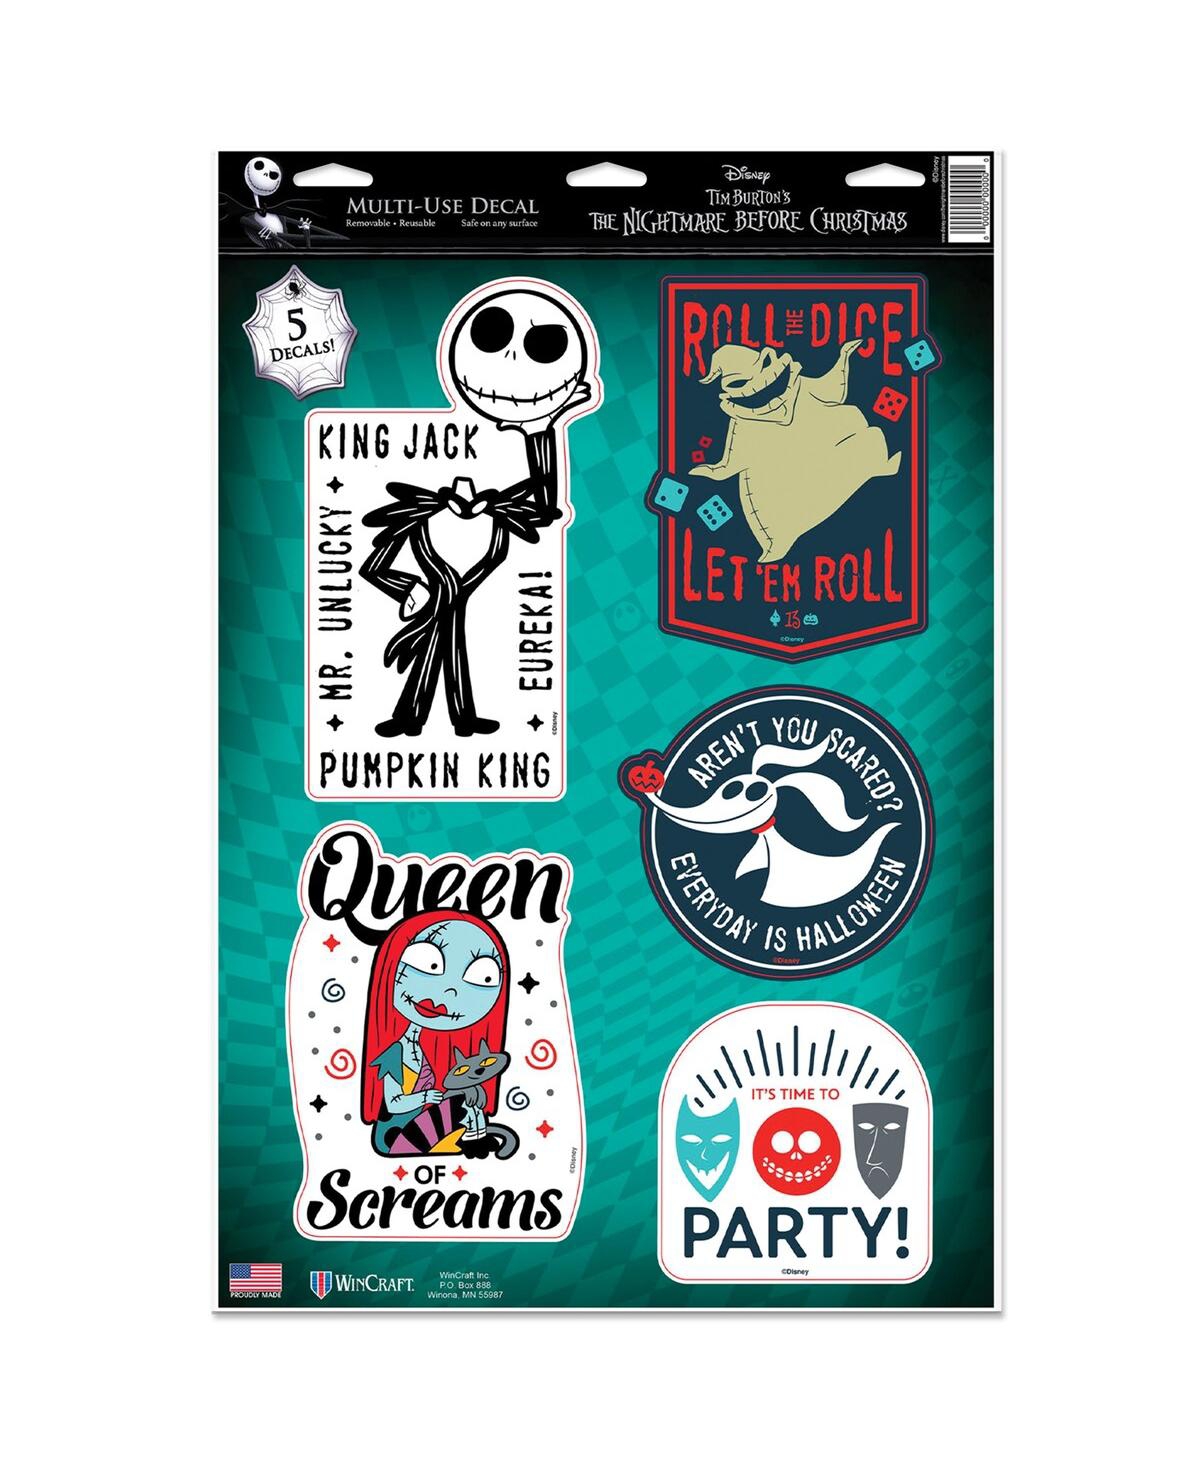 Wincraft The Nightmare Before Christmas 11" X 17" Multi-use Decal Sheet